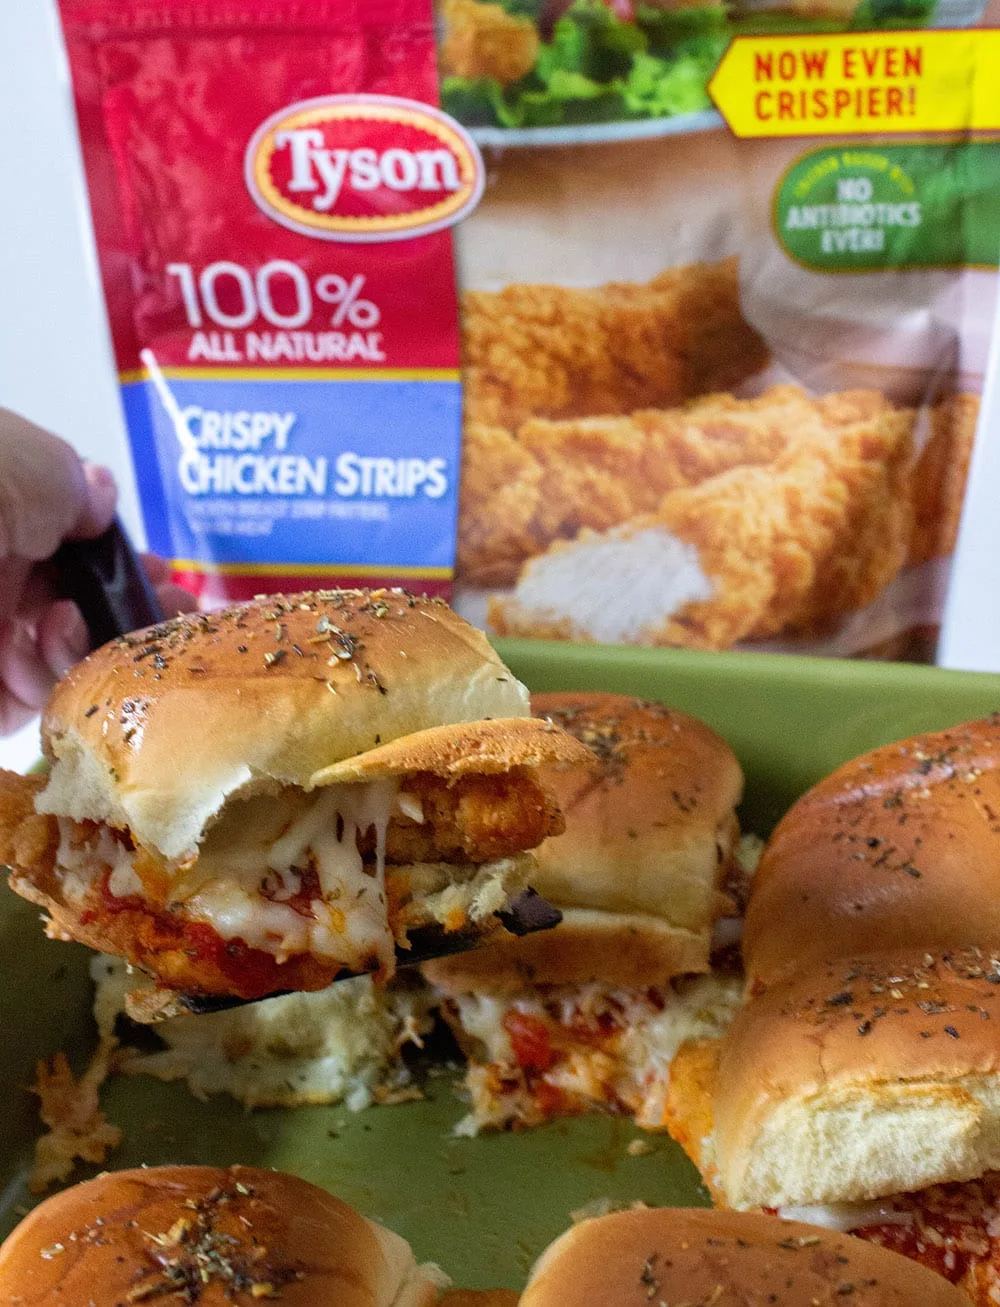 Chick parm sliders next to the bag of Tyson crispy chicken strips. 